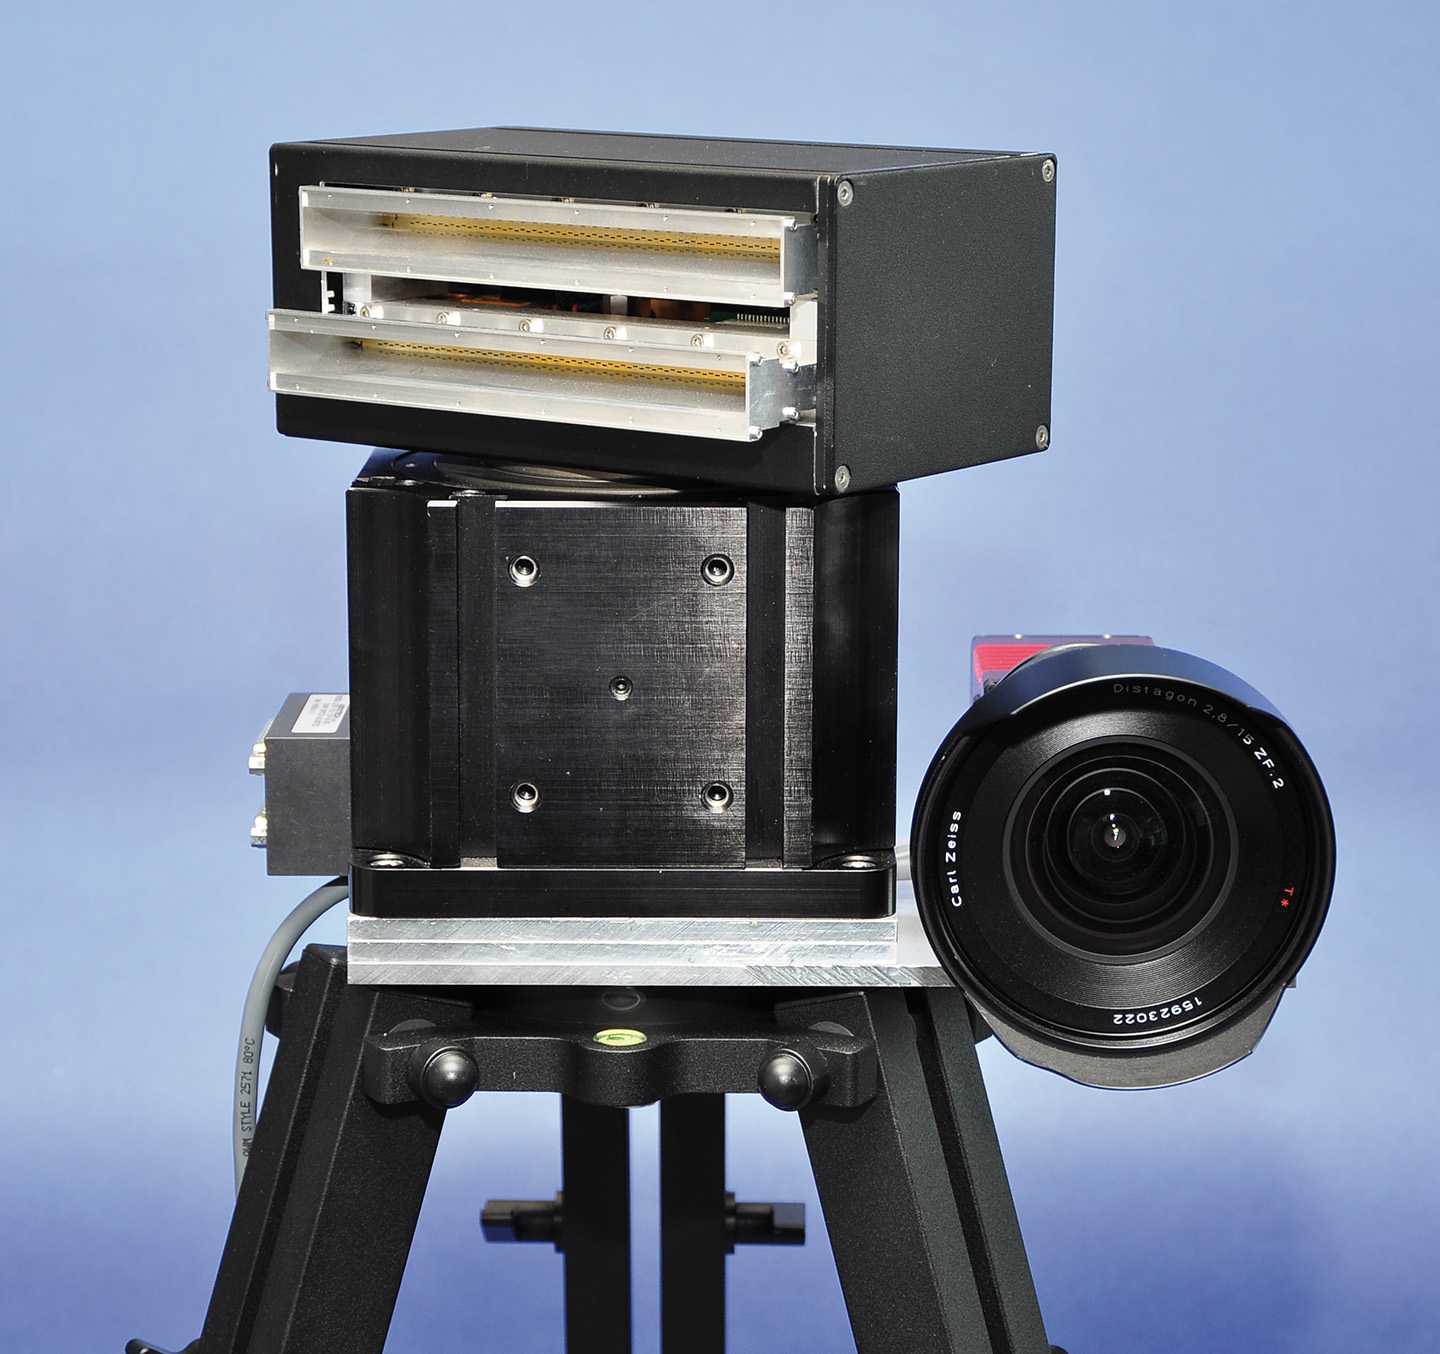 Mechanical scanning SSRS (Scanning Surveillance Radar System) with optical camera. The rotating sensor scans with a small aperture angle of 1.8° in azimuth.